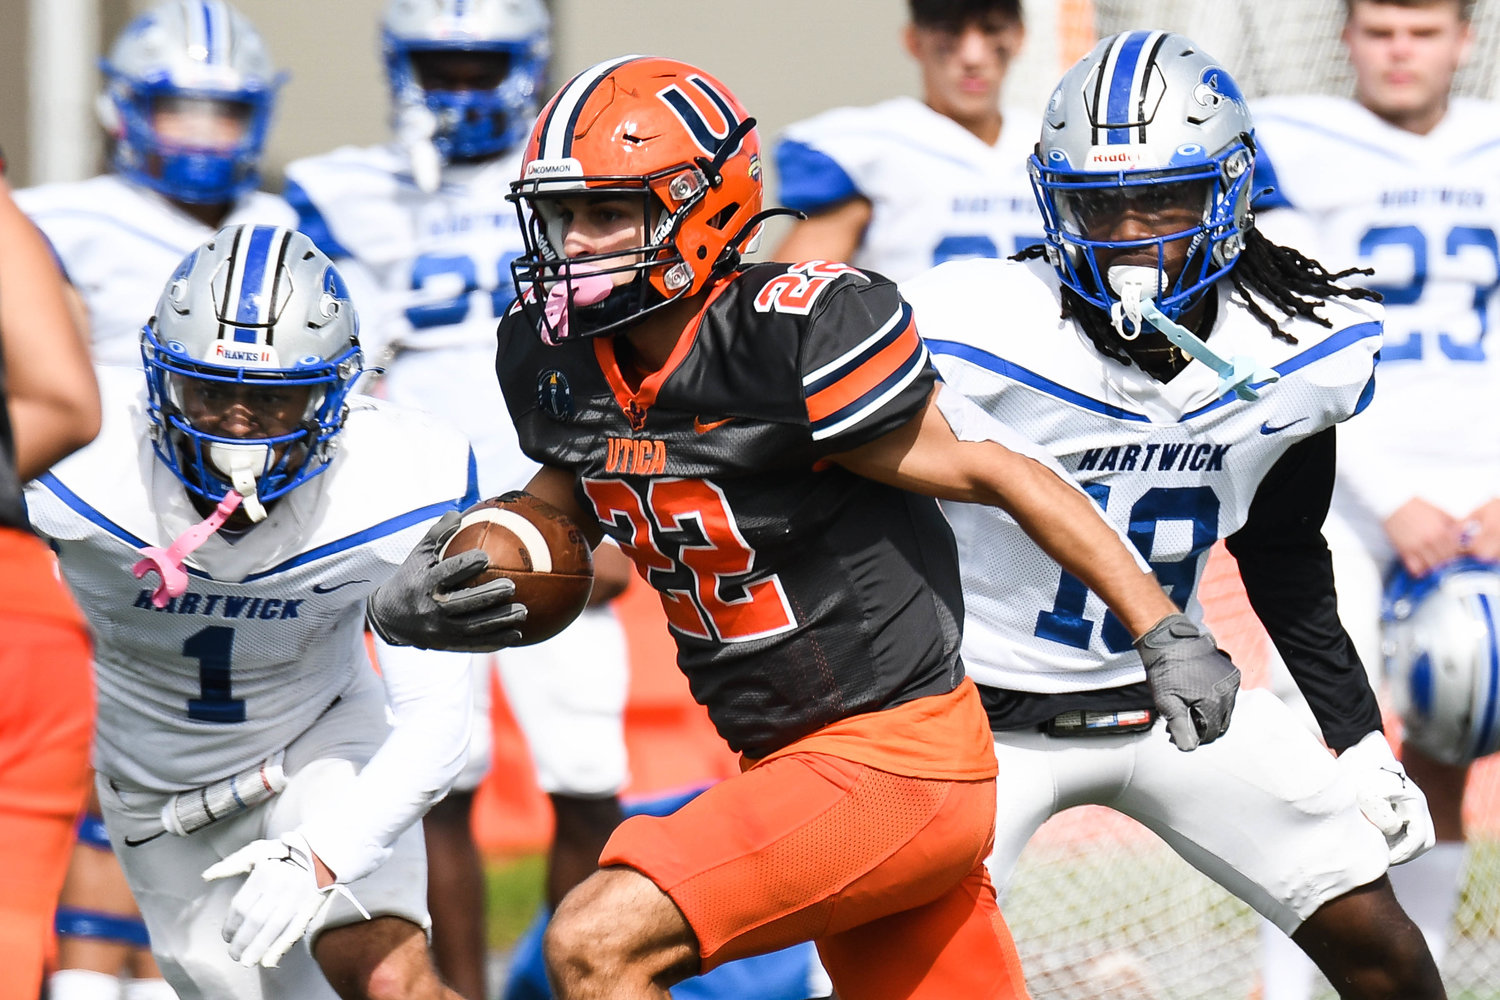 Nate Palmer runs the ball in a game against Hartwick in October.